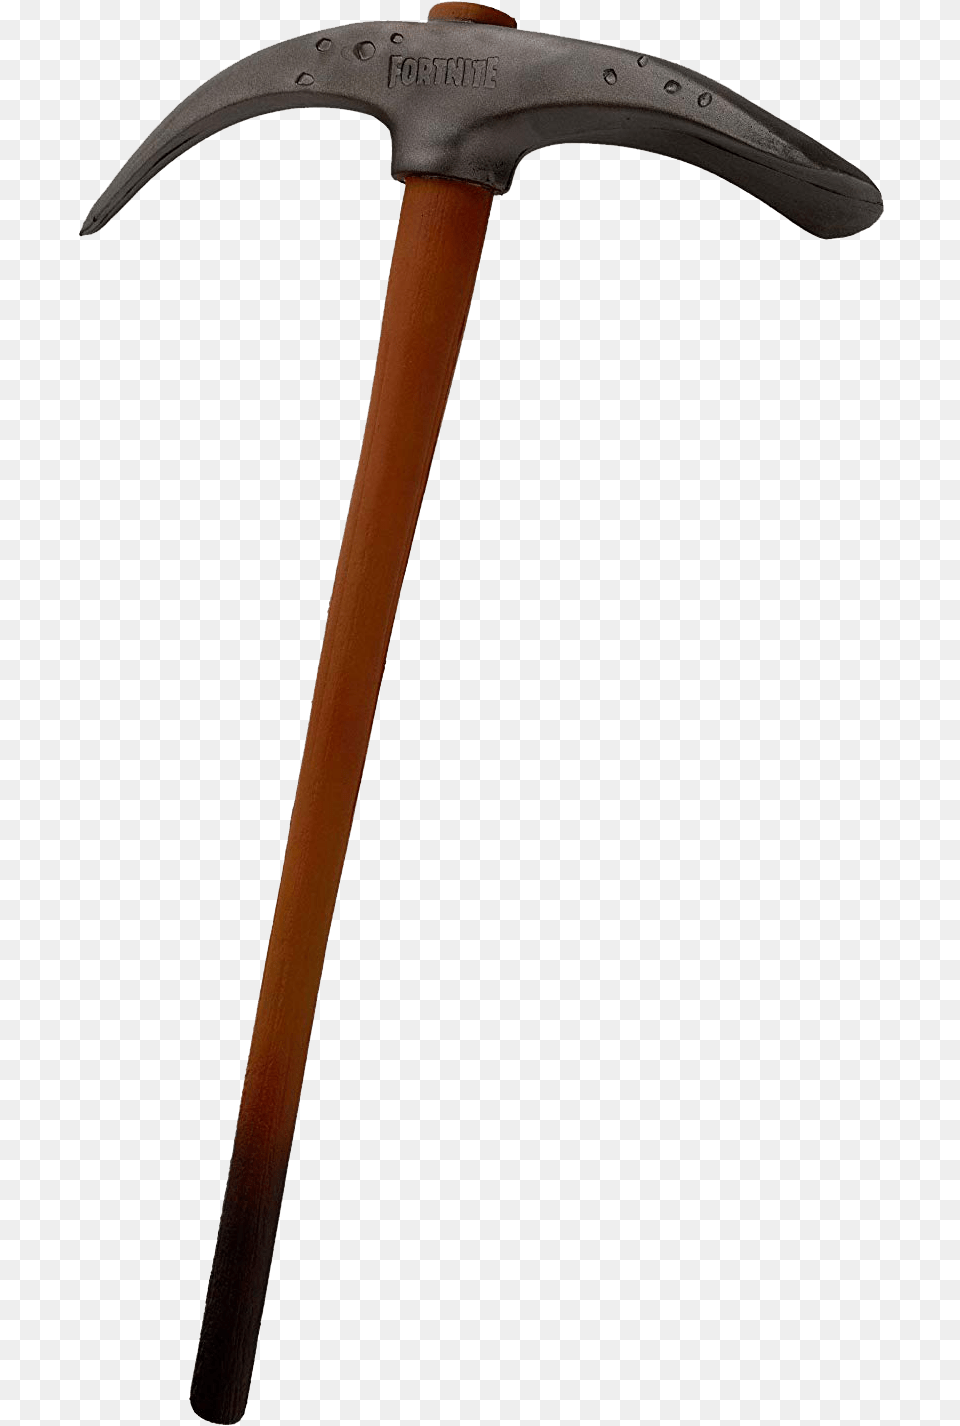 Fortnite Pickaxe Background 7 Tiers Spirit Halloween Fortnite Pickaxe, Device, Mattock, Tool, Blade Free Png